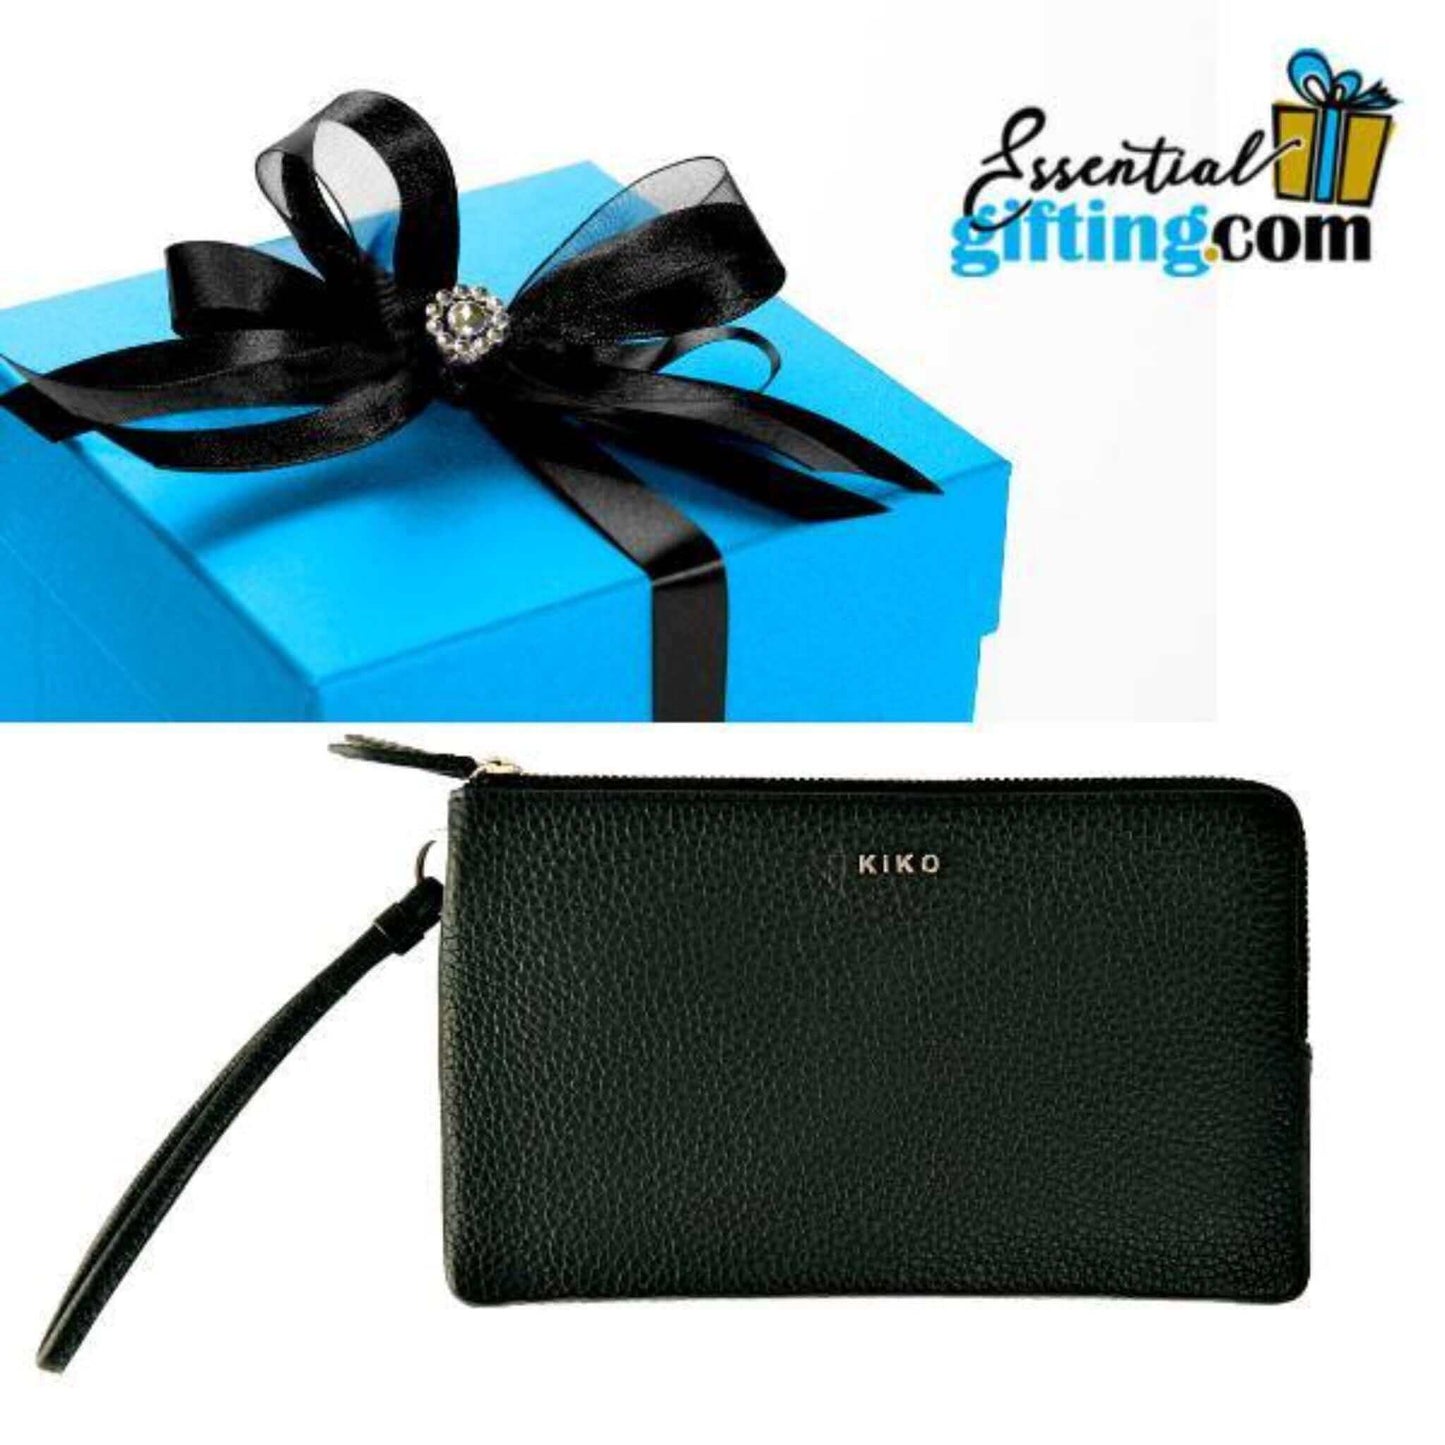 Sleek black wristlet wallet with double zipper, resting atop a teal gift box with a decorative bow.